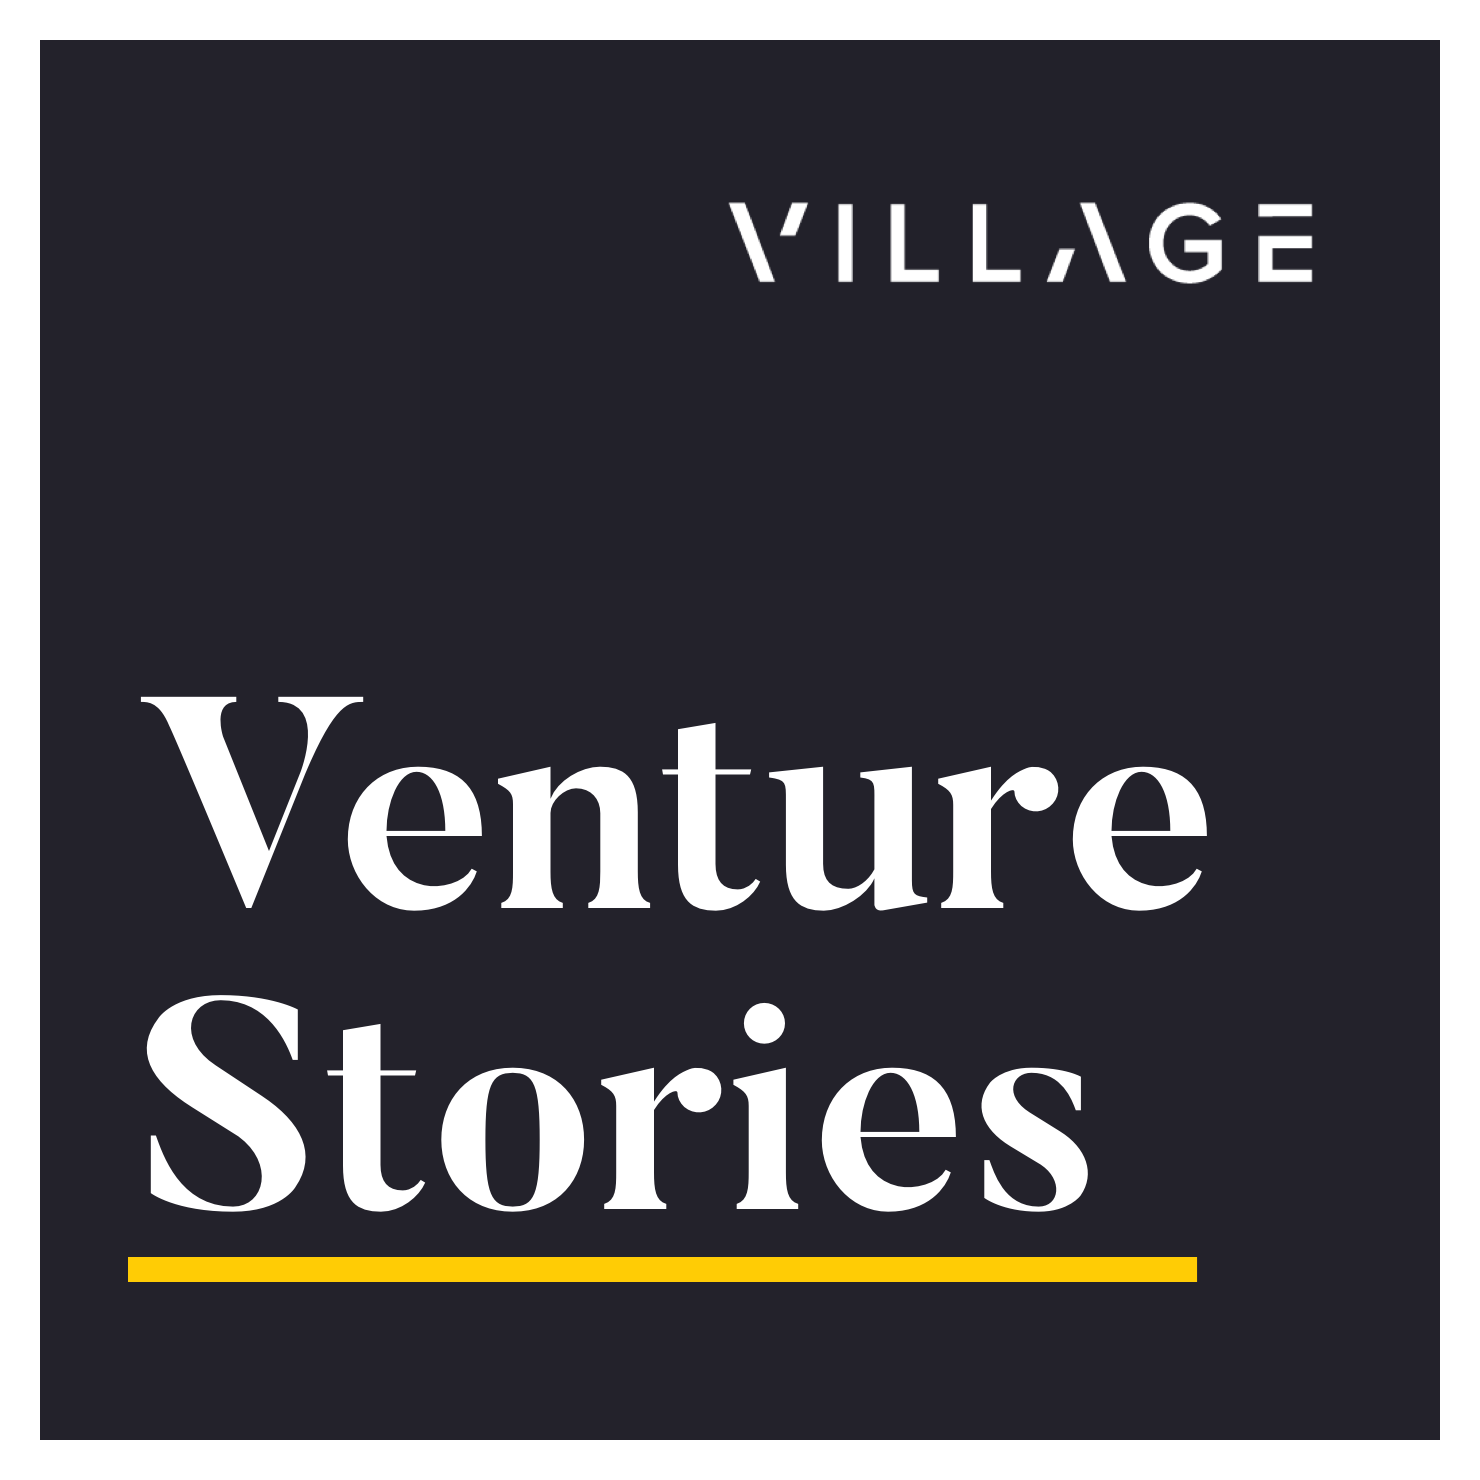 🎙Podcast: Our Co-founder and CEO, Siadhal Magos, appears on Venture Stories